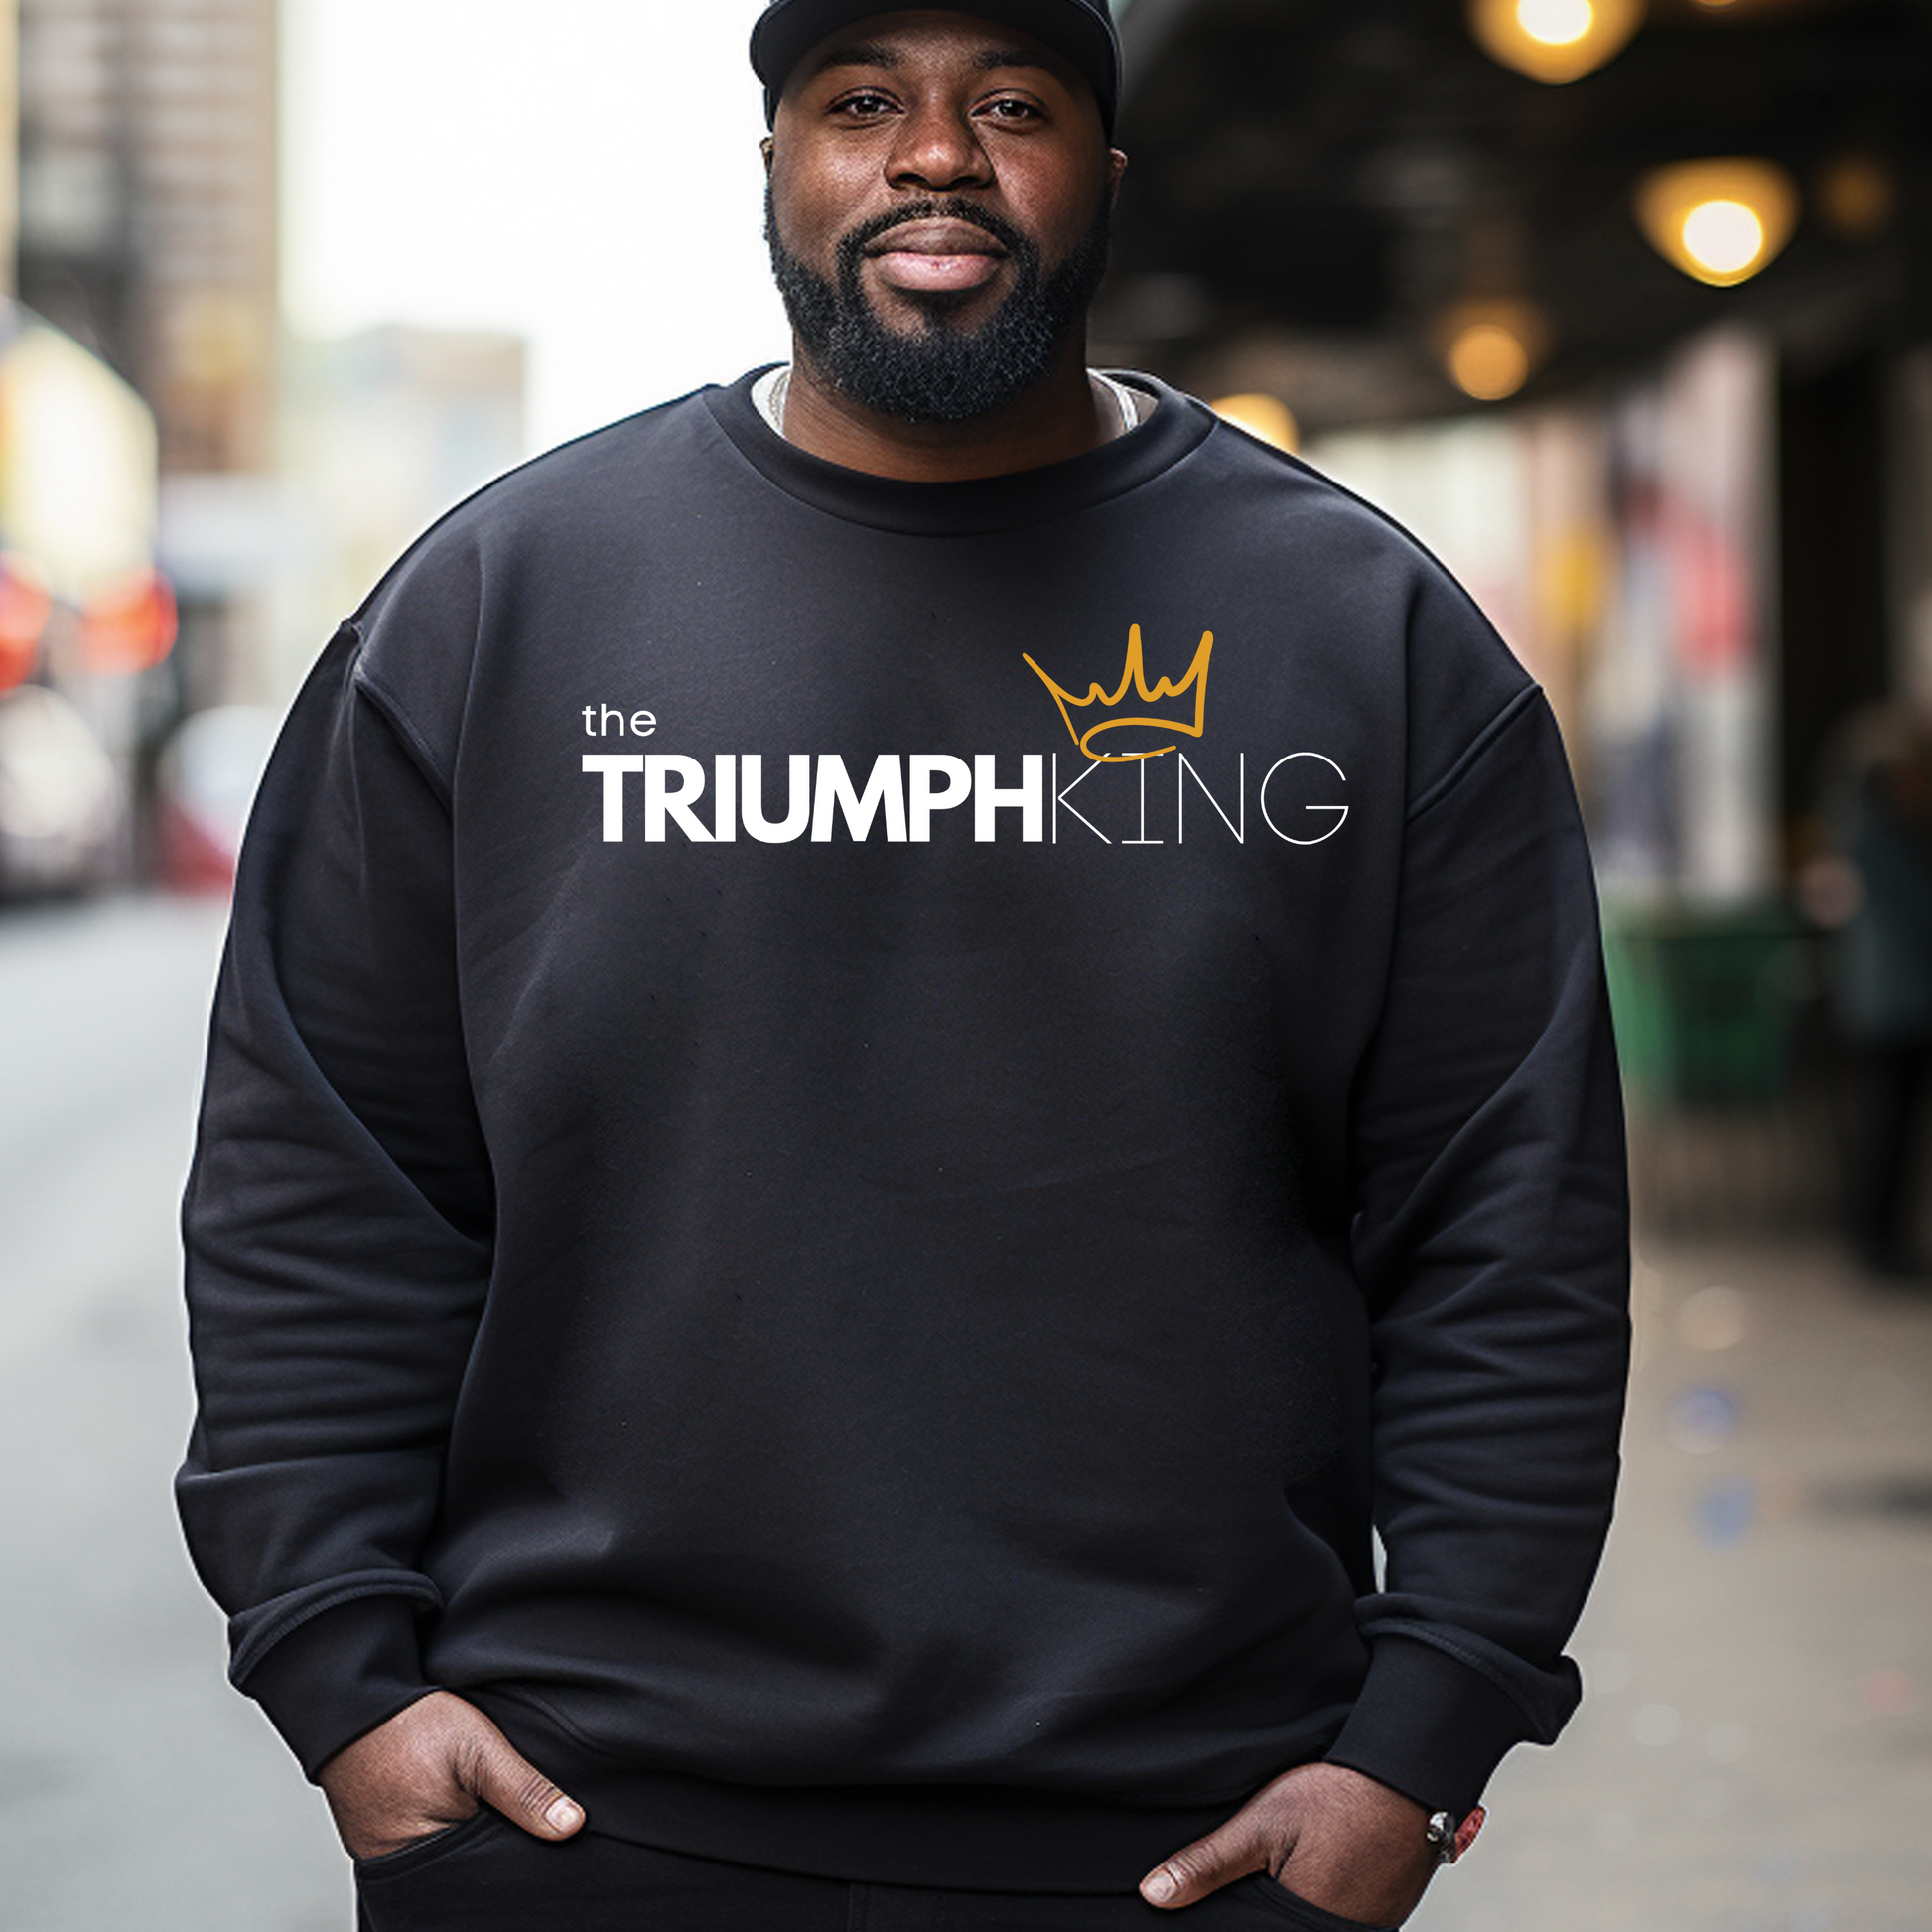 Buy our Triumph King black sweatshirt. This comfortable faith inspired clothing is for Christian men who know they can triumph over any situation with the help of Jesus Christ. Enjoy a soft and comfy sweatshirt like this on a daily basis.